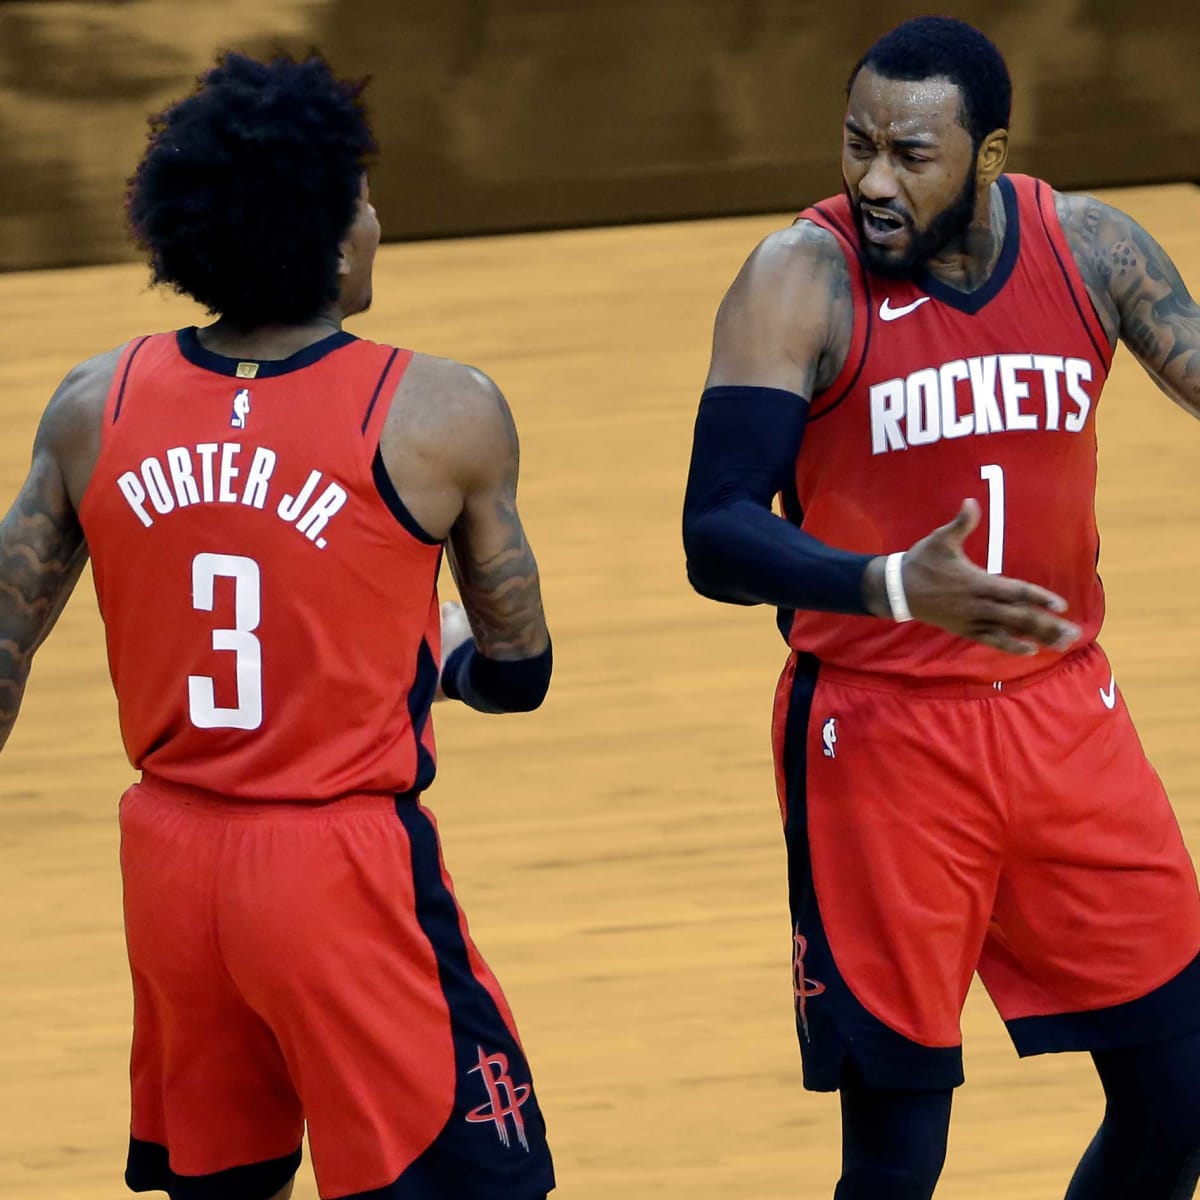 John Wall warns Rockets' Porter Jr., Green about getting adjusted to losing  - Basketball Network - Your daily dose of basketball